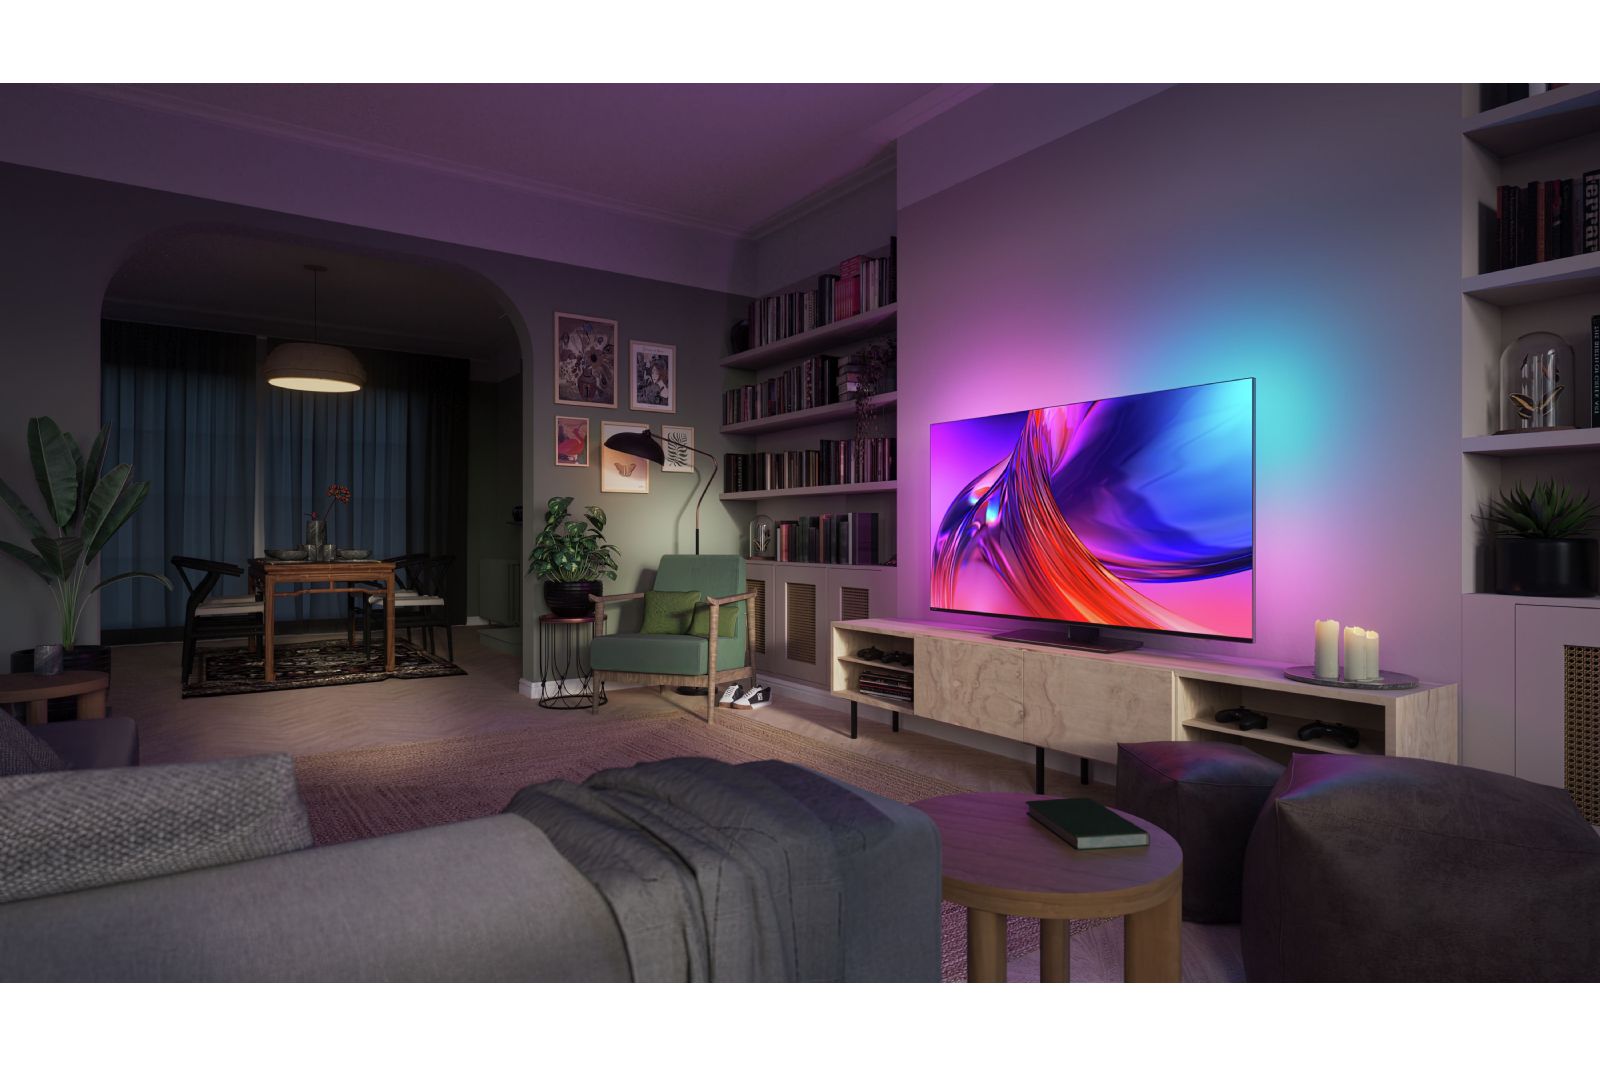 TV-apparater Philips 65PUS8808 The One Ambilight 4K LED-TV